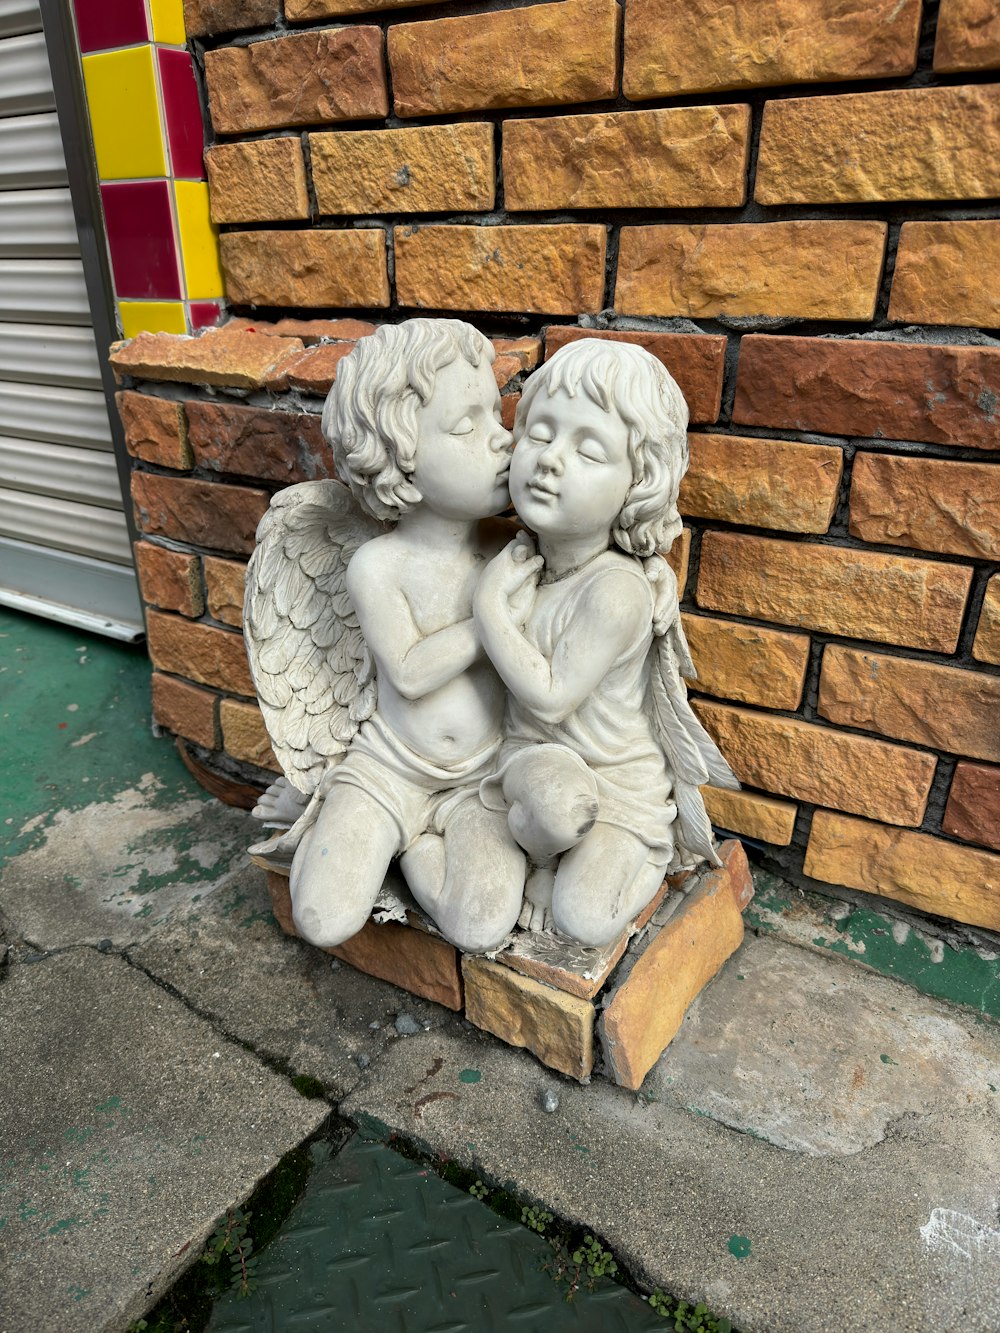 a statue of two cherubs sitting next to a brick wall